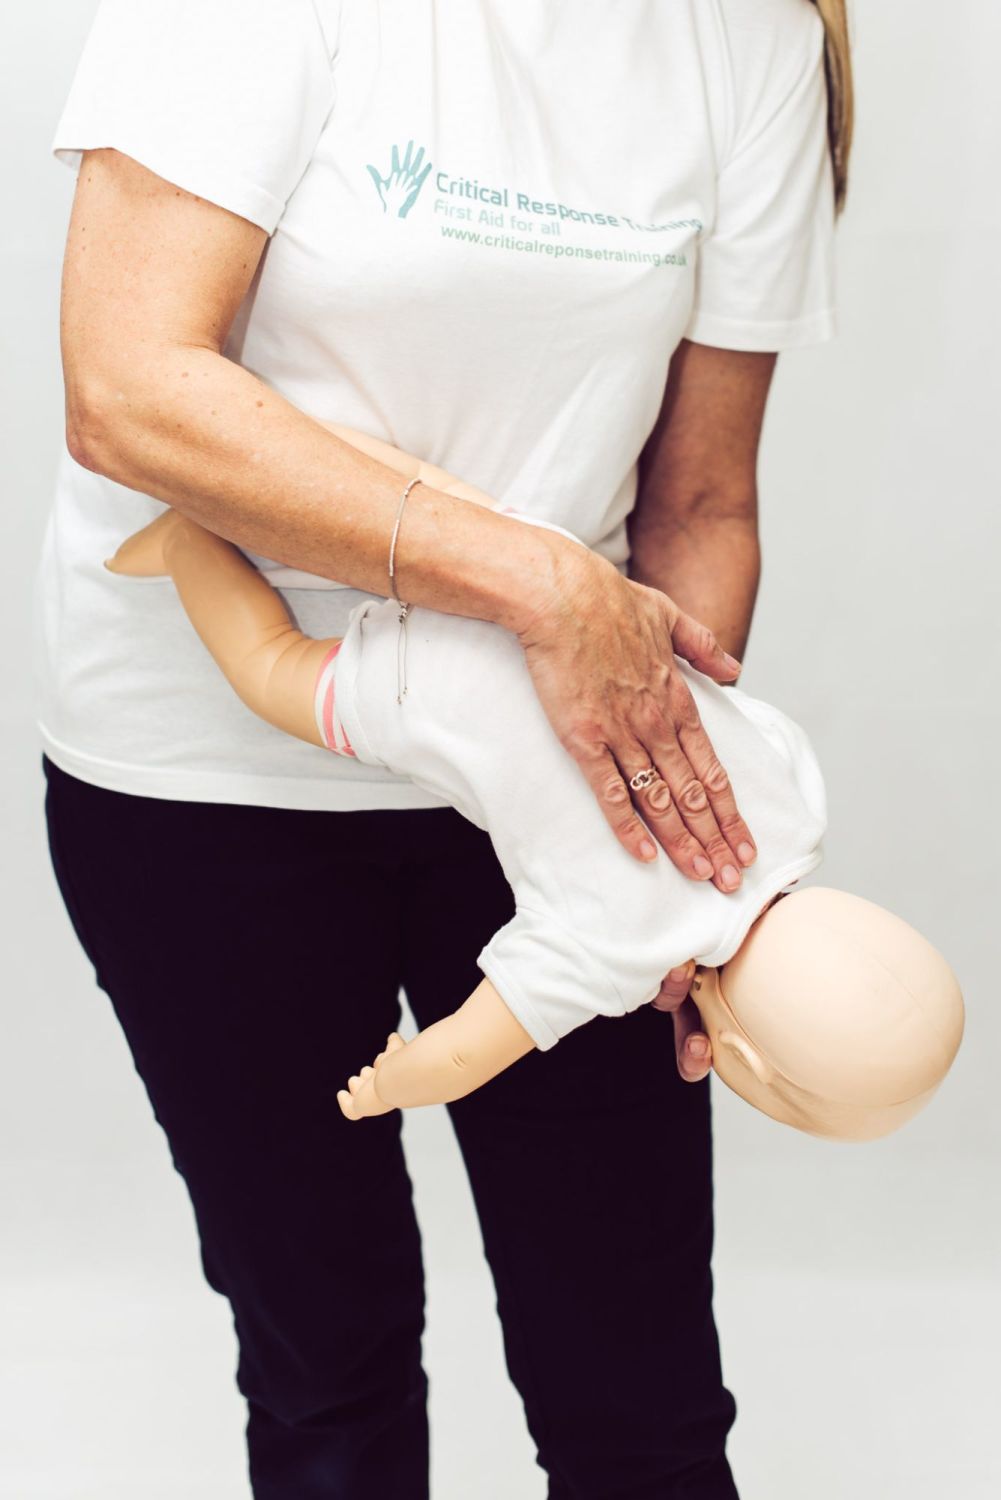 6-hour Paediatric First Aid course : Saturday 10th October 2022